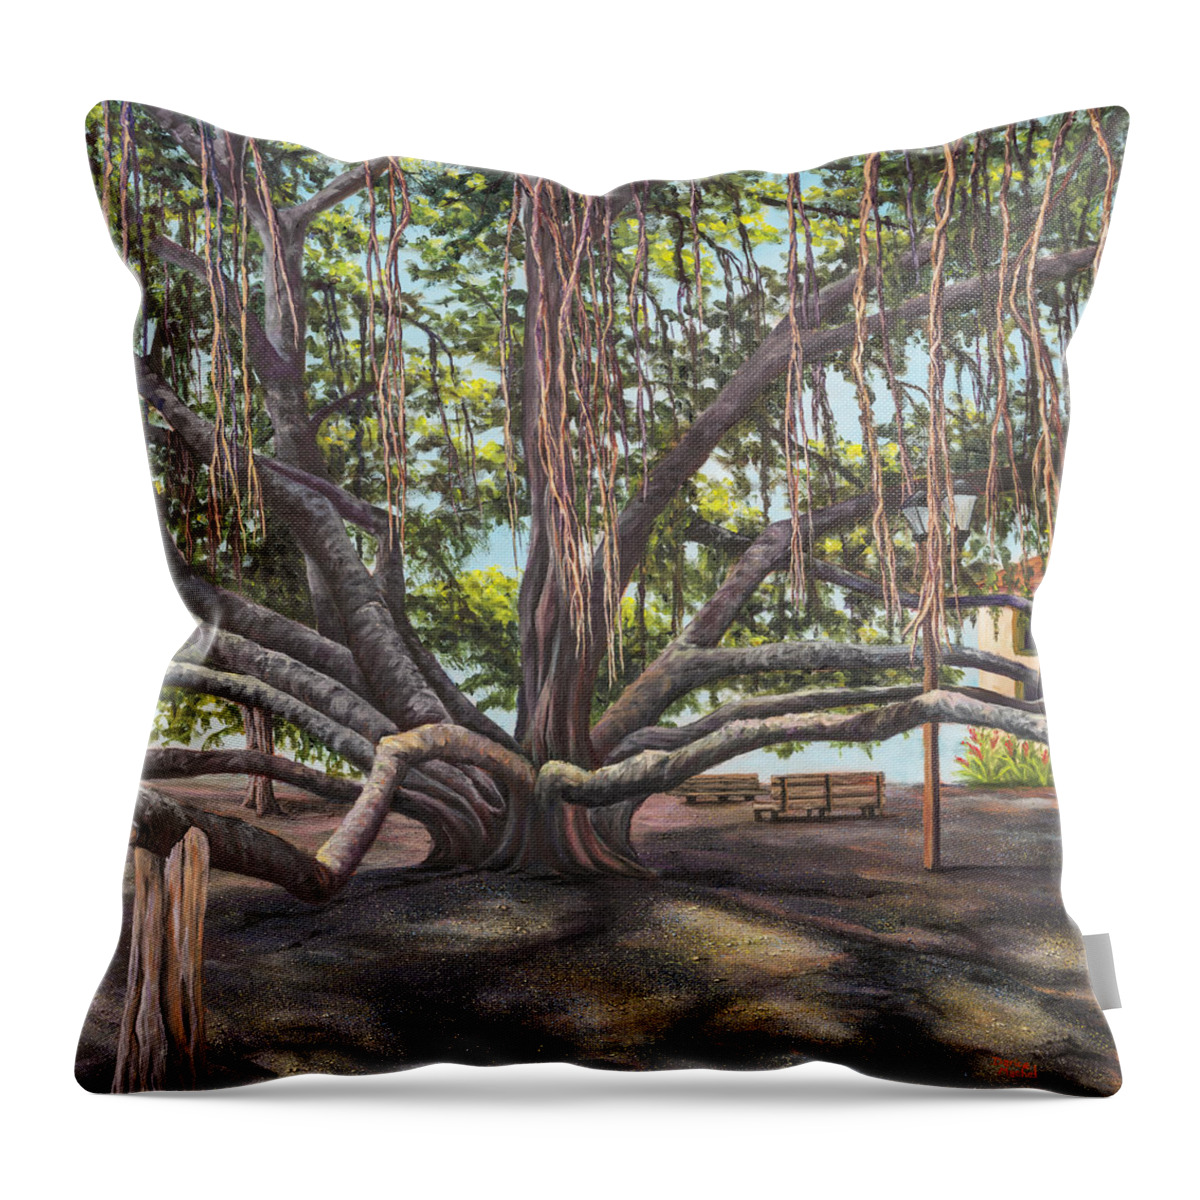 Landscape Throw Pillow featuring the painting Banyan Tree Lahaina Maui by Darice Machel McGuire